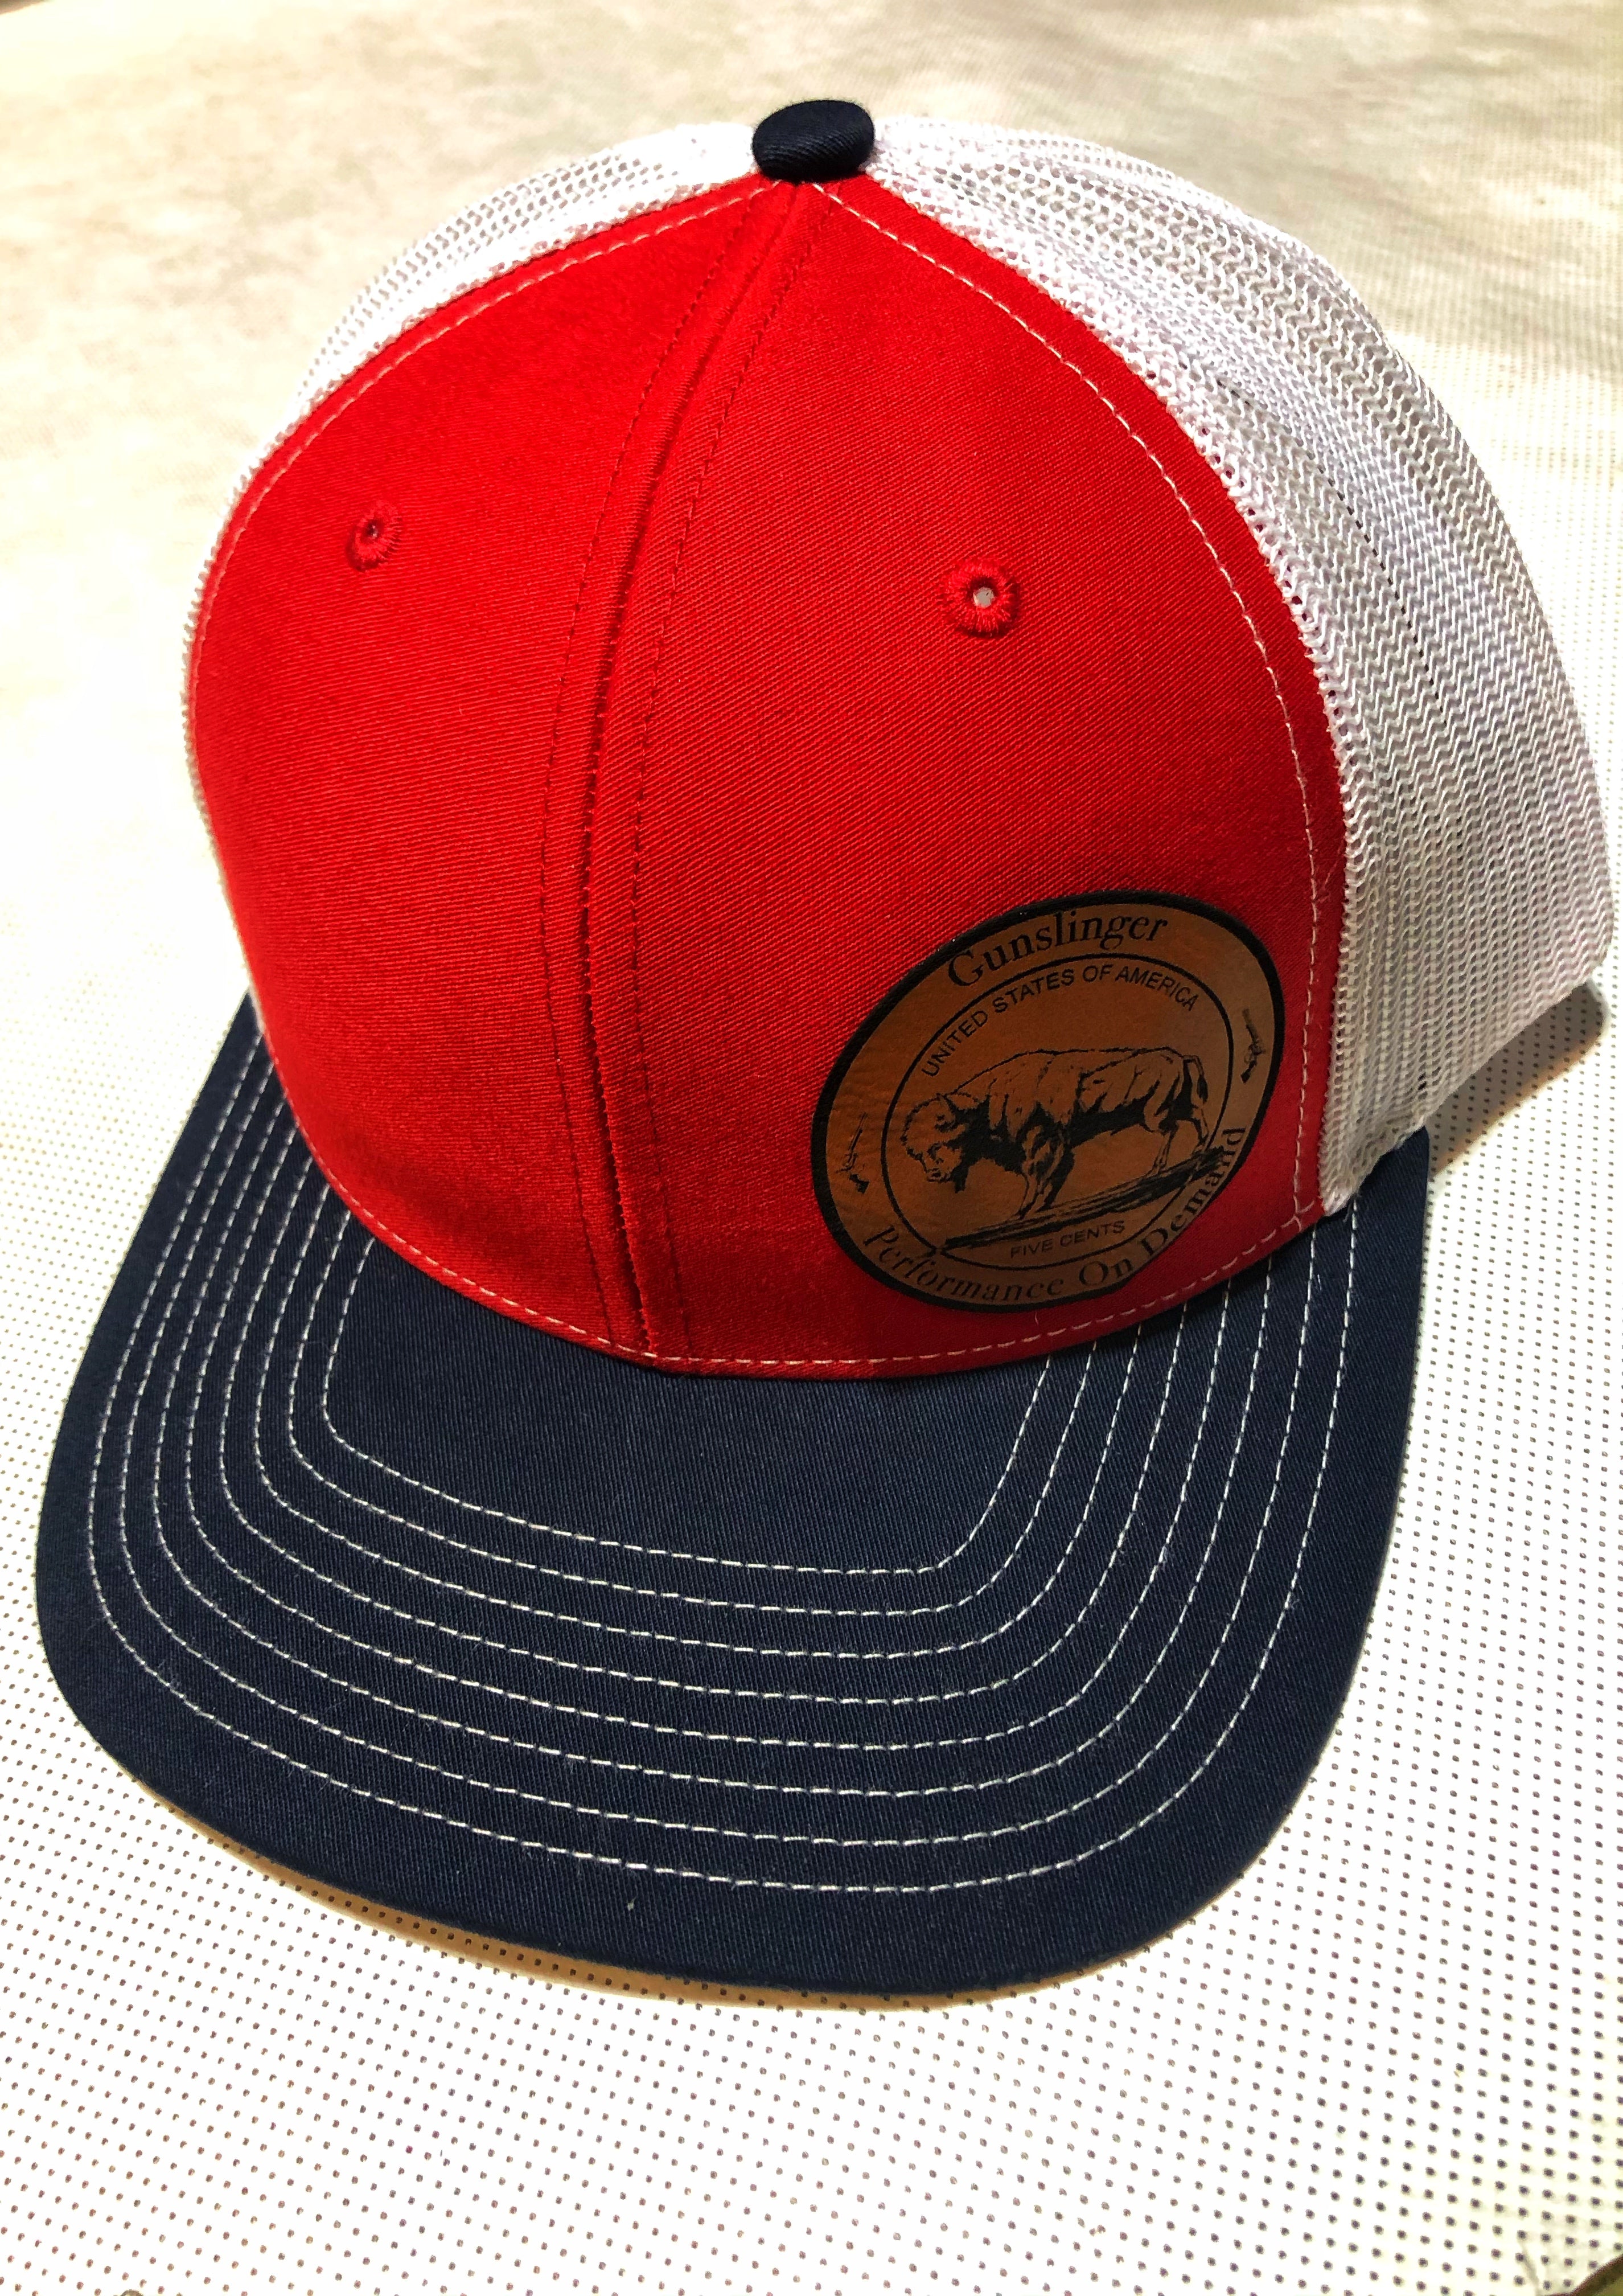 Leather Coin Trucker Hat